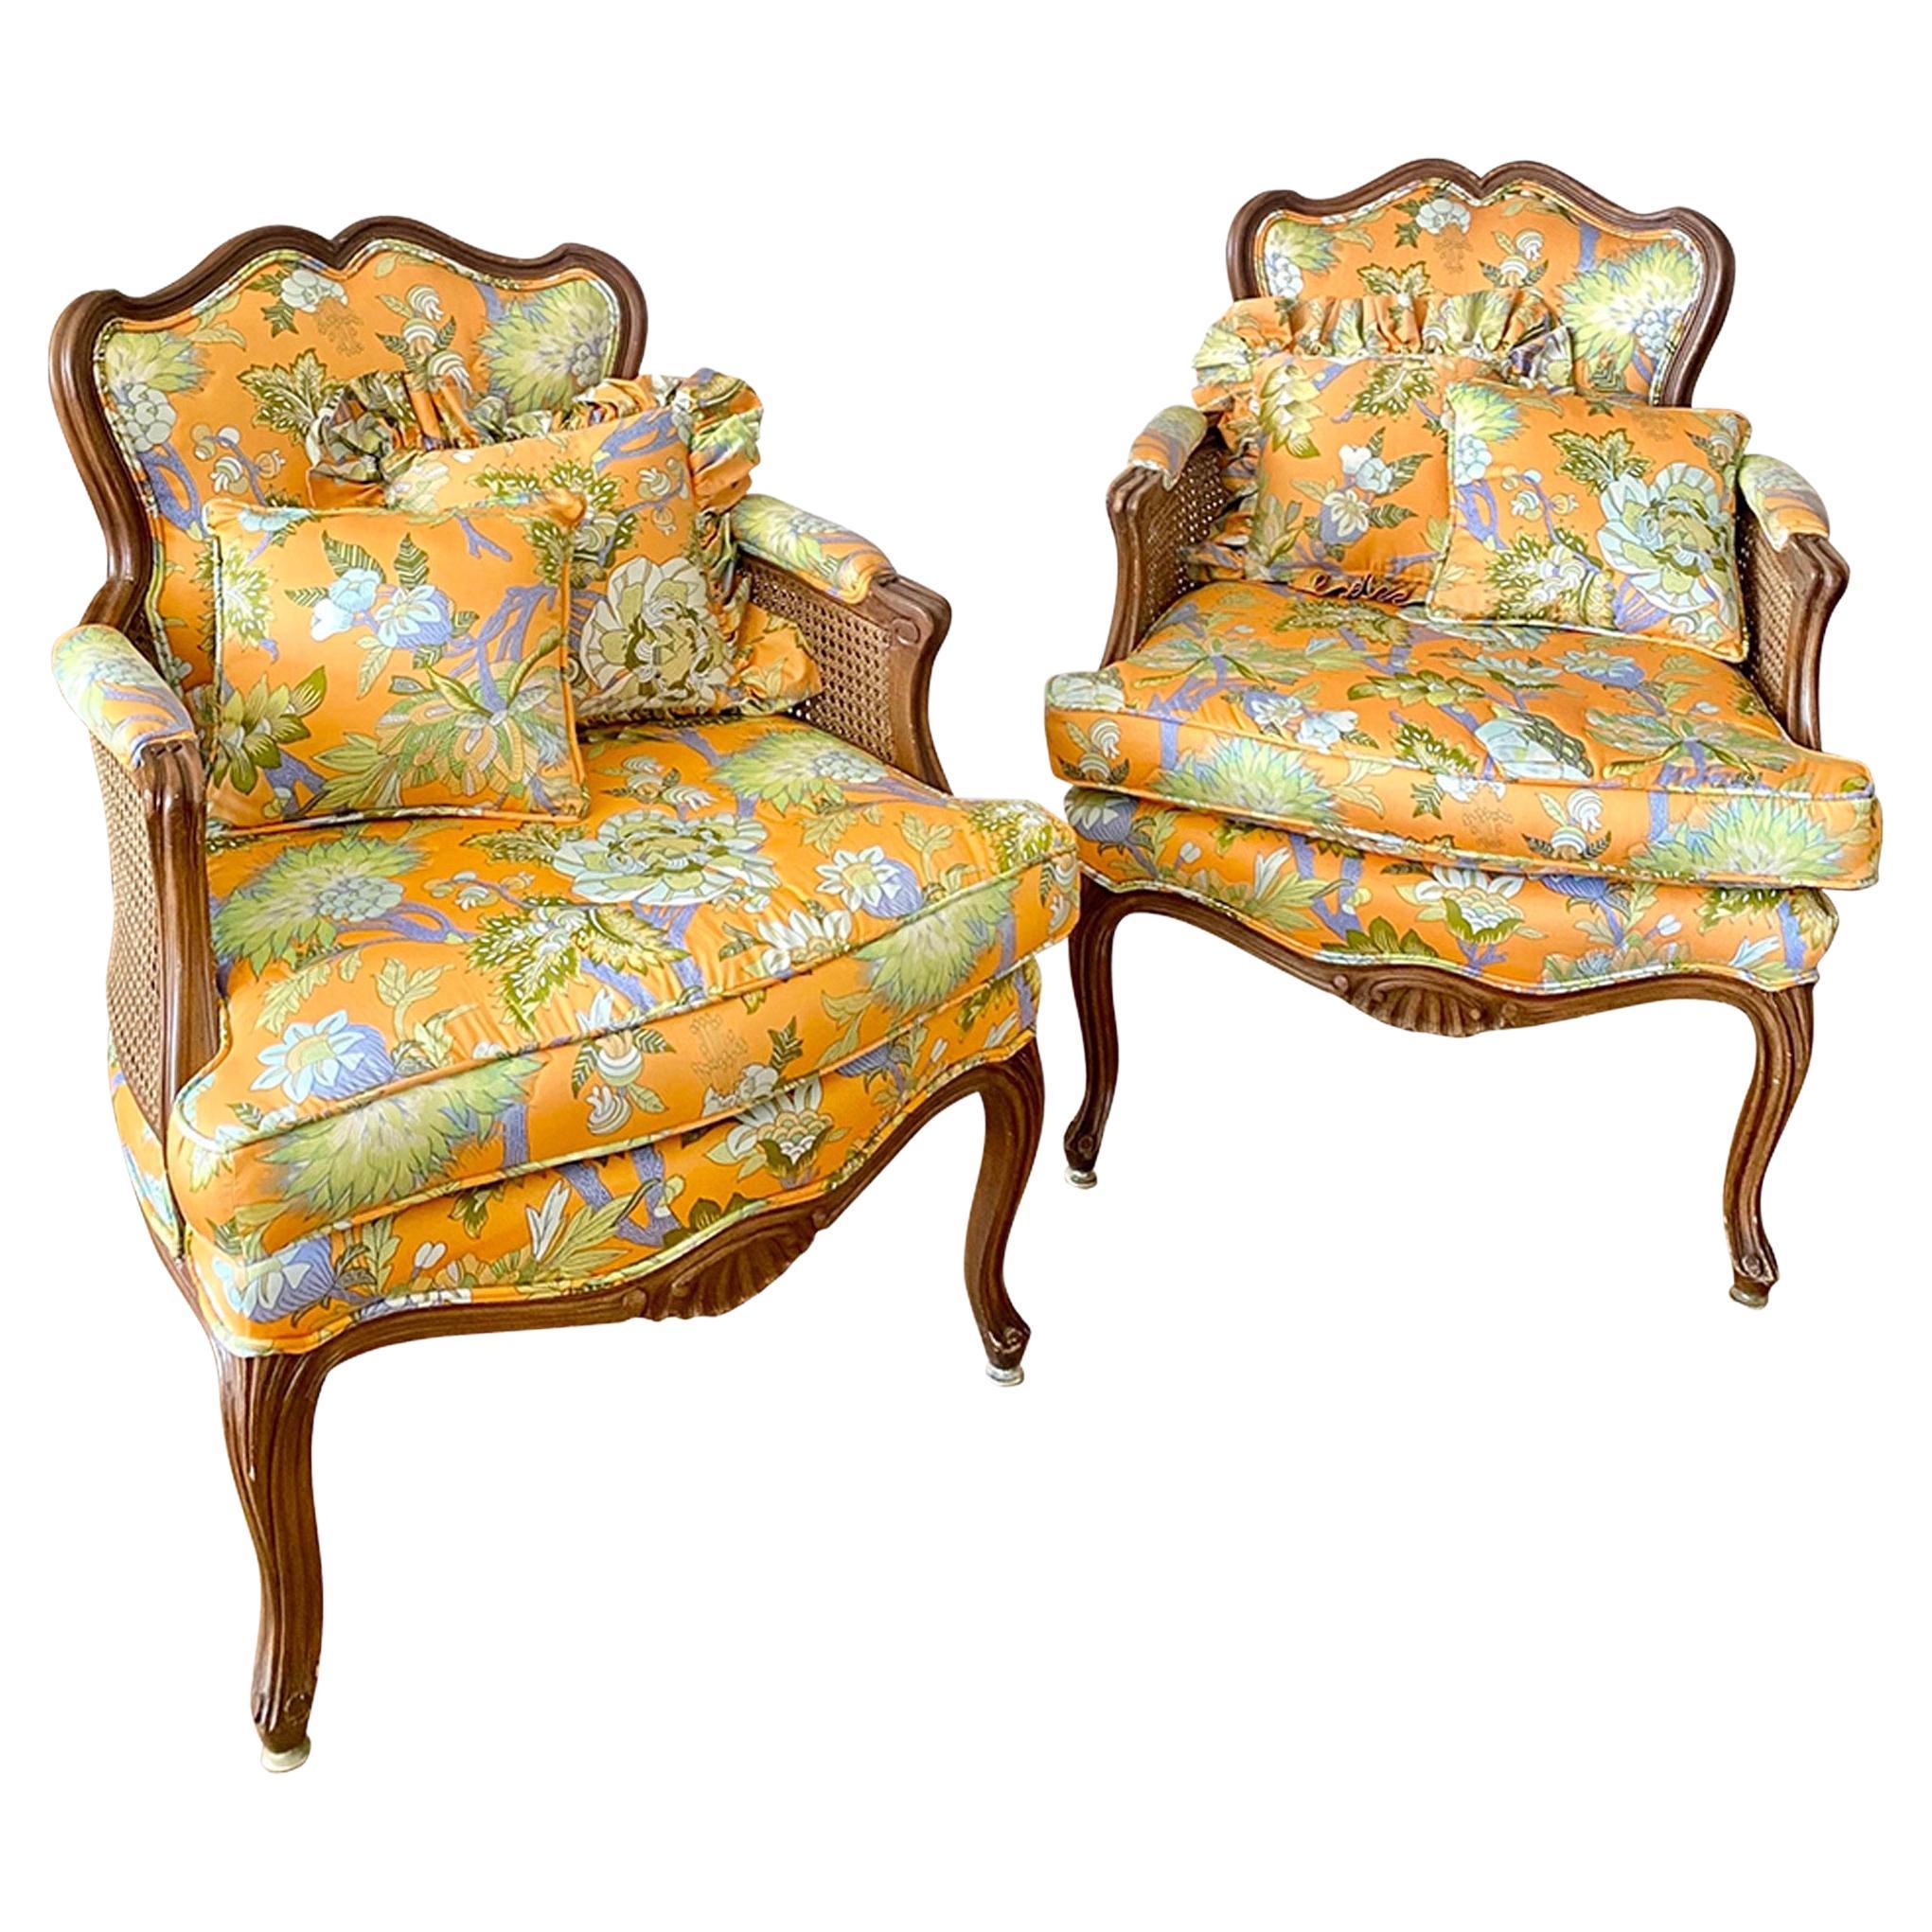 French Louis XV Style Bergere Armchairs With Floral Upholstery